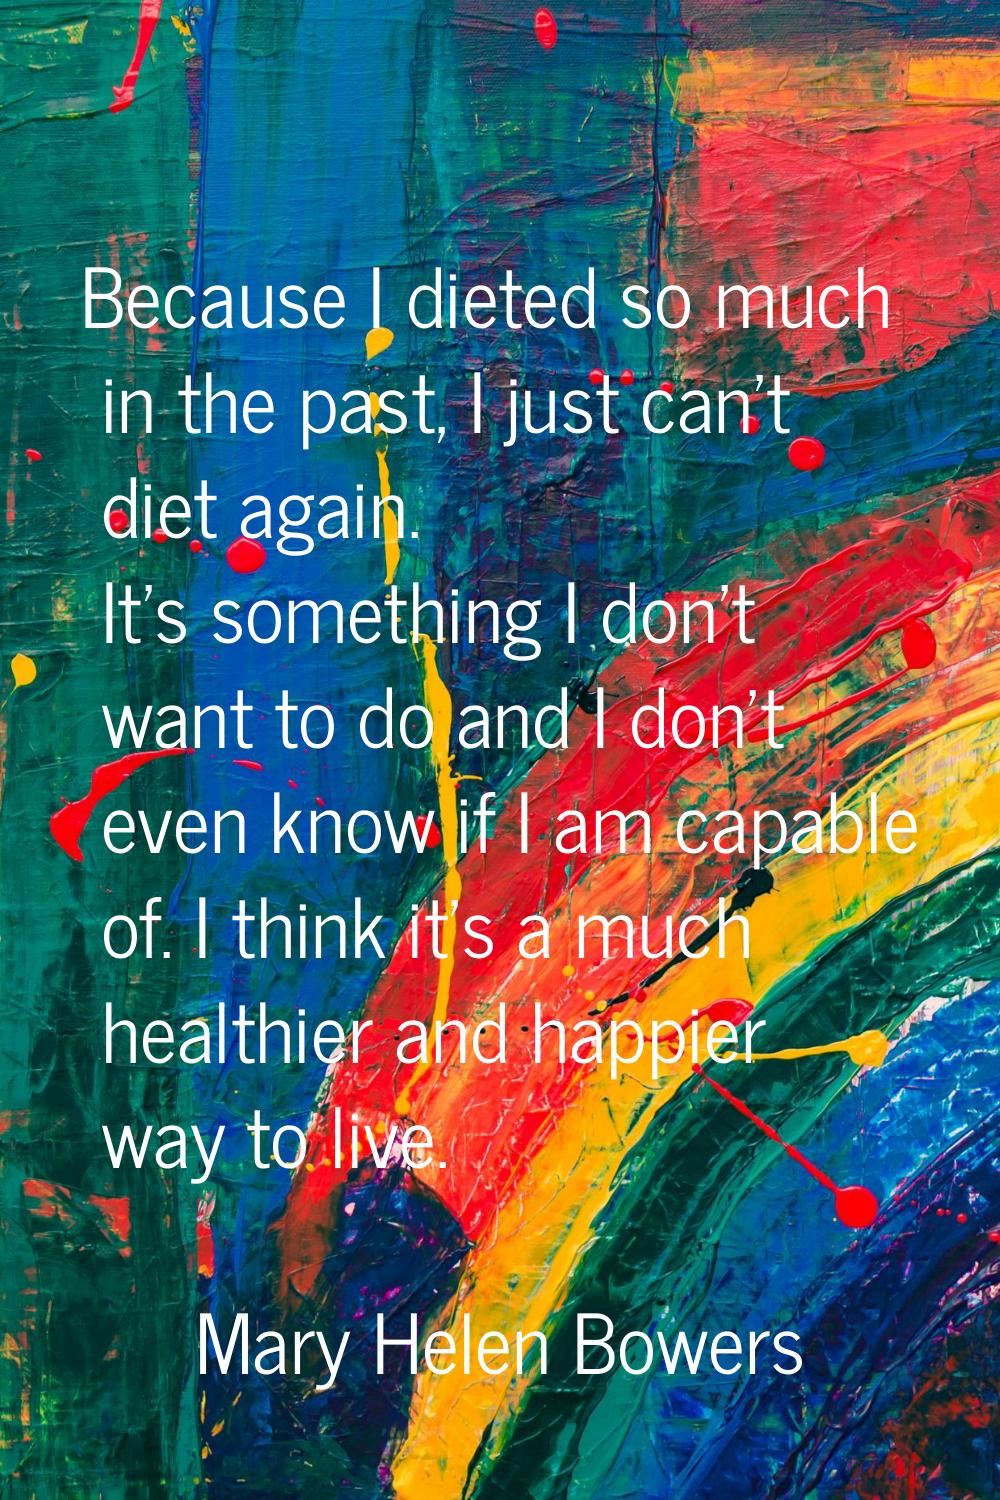 Because I dieted so much in the past, I just can't diet again. It's something I don't want to do an